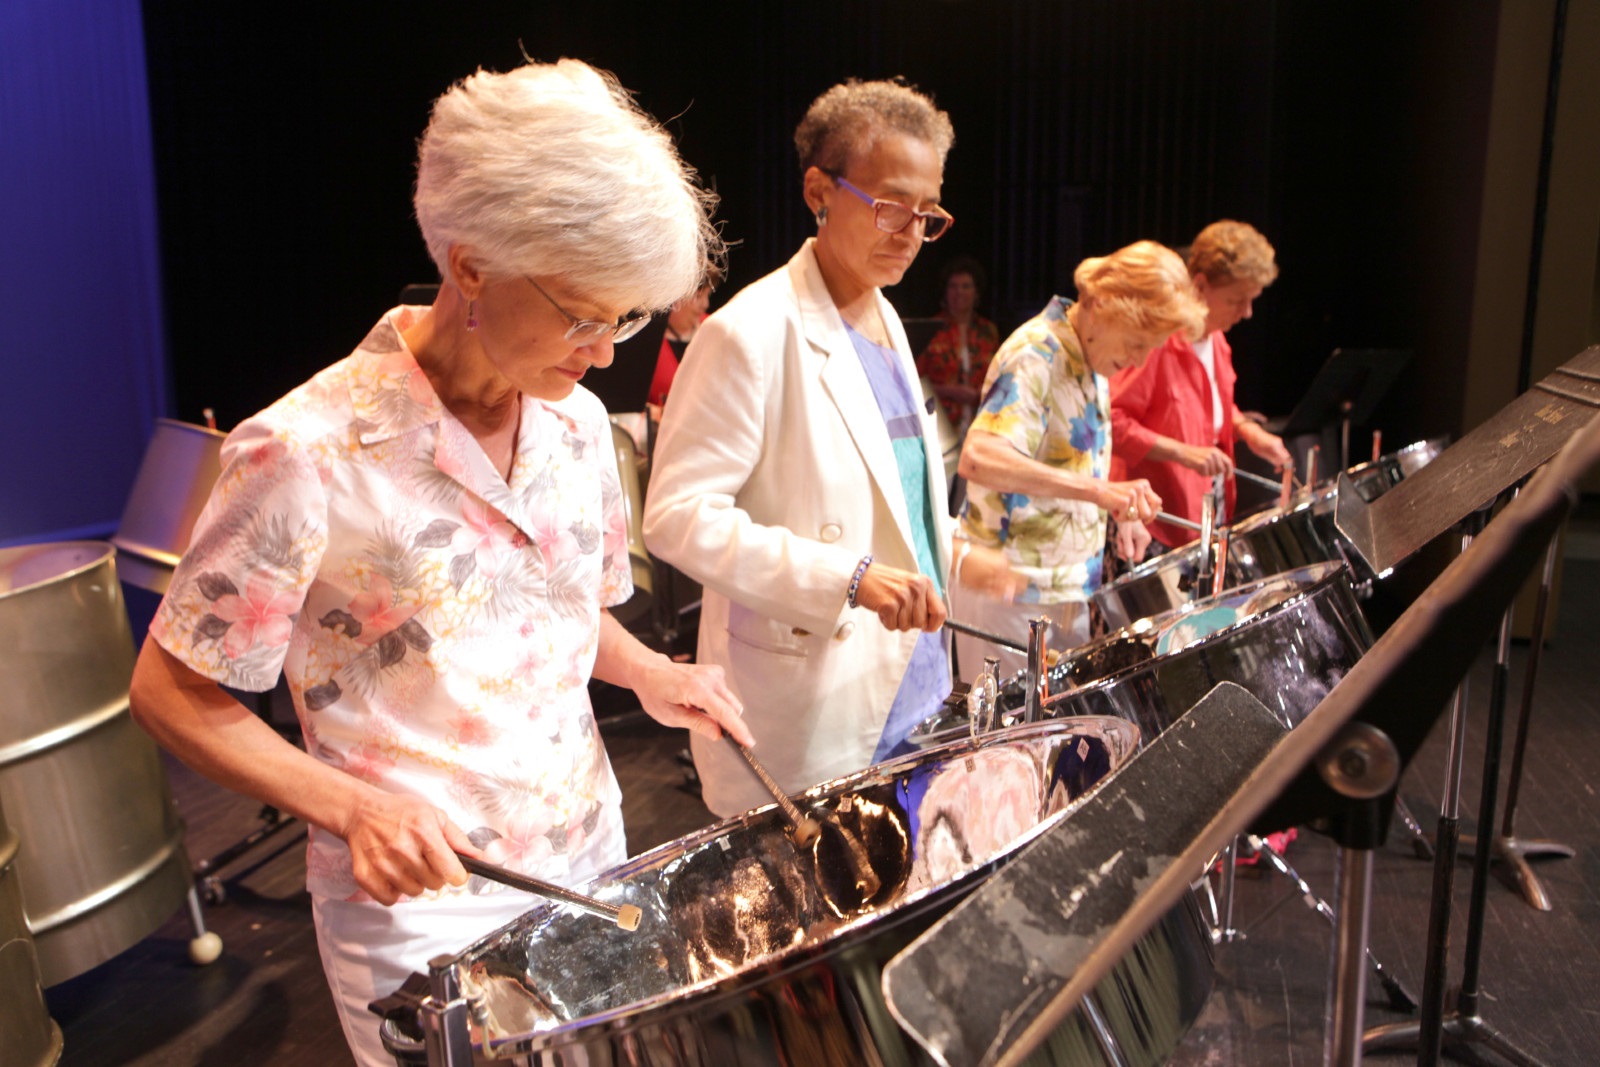 Lifelong learners enjoy steel drum band classes offered by OLLI at Vanderbilt